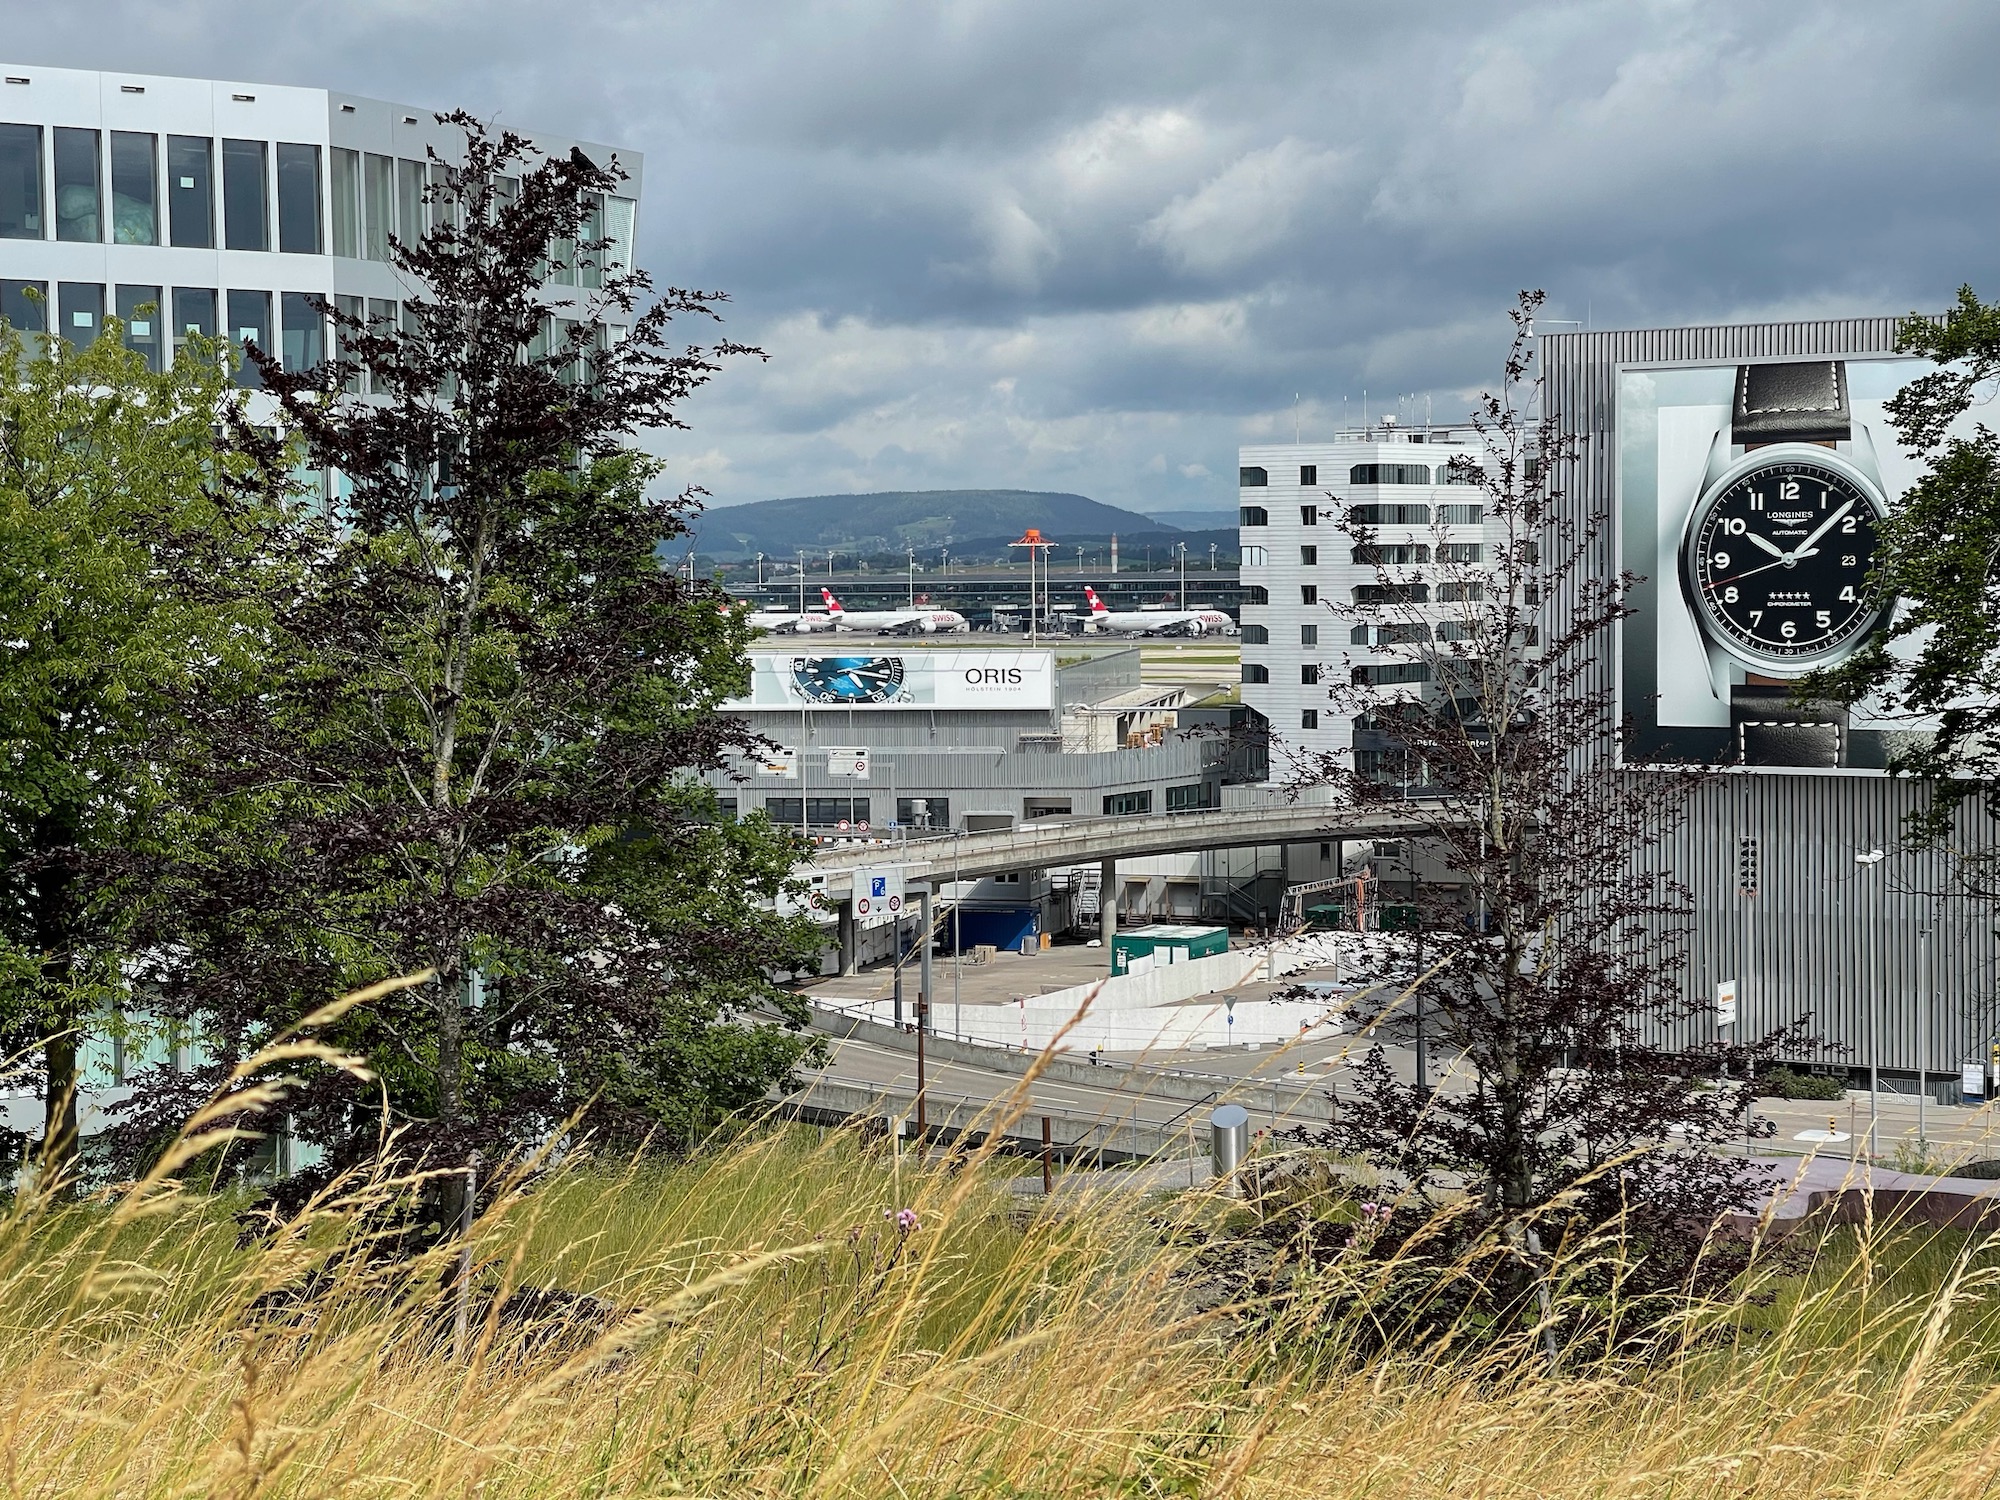 a tall grass and trees with a clock on the side of a building